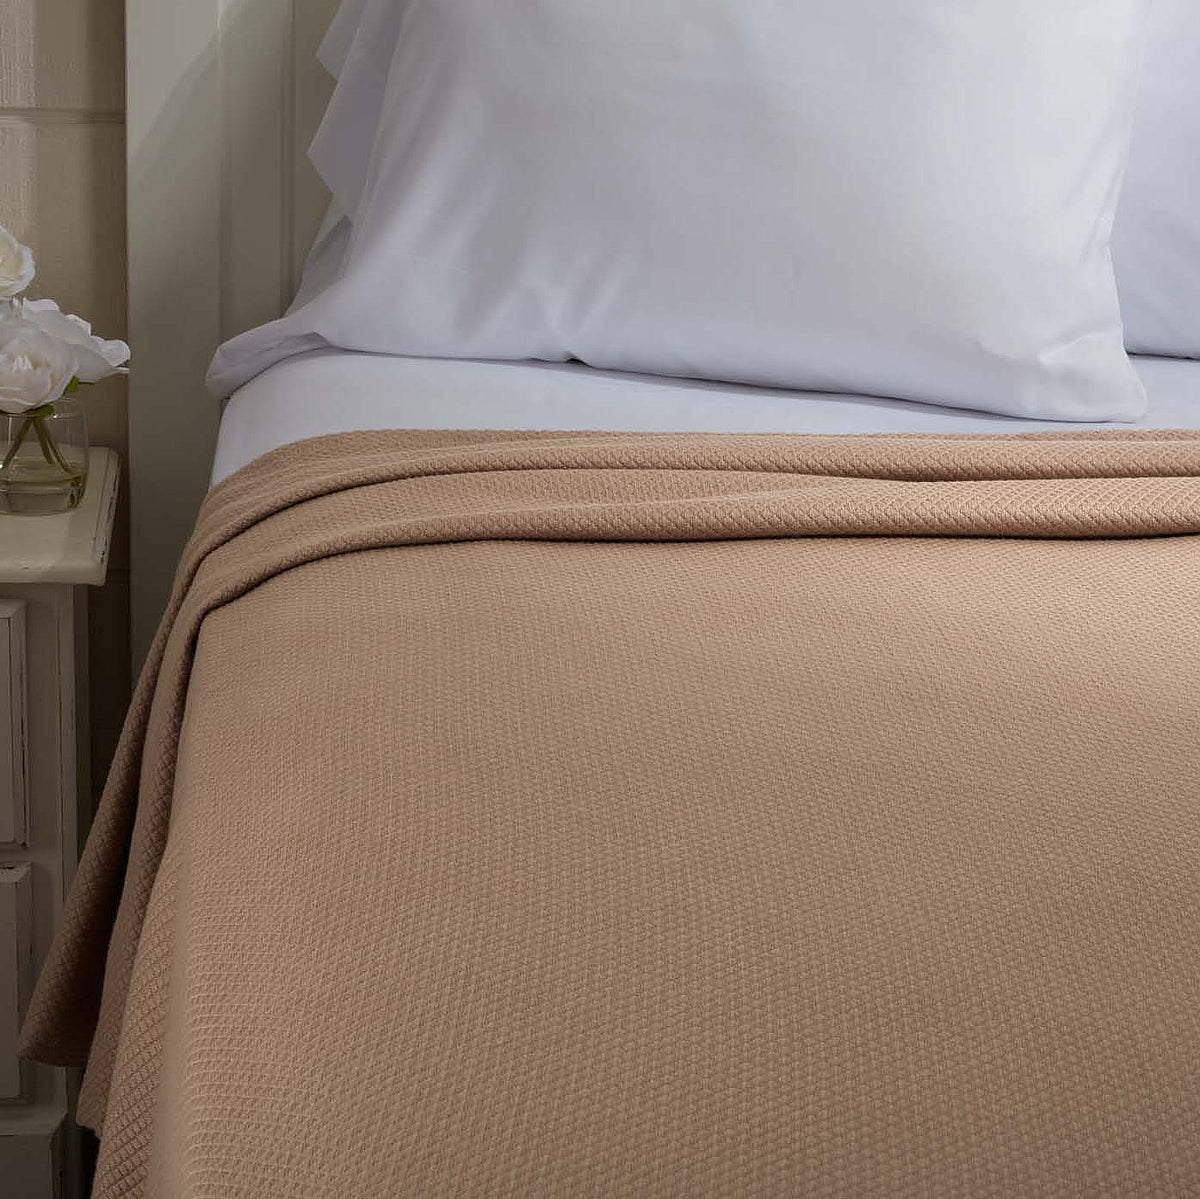 April & Olive Serenity Tan King Cotton Woven Blanket 90x108 By VHC Brands